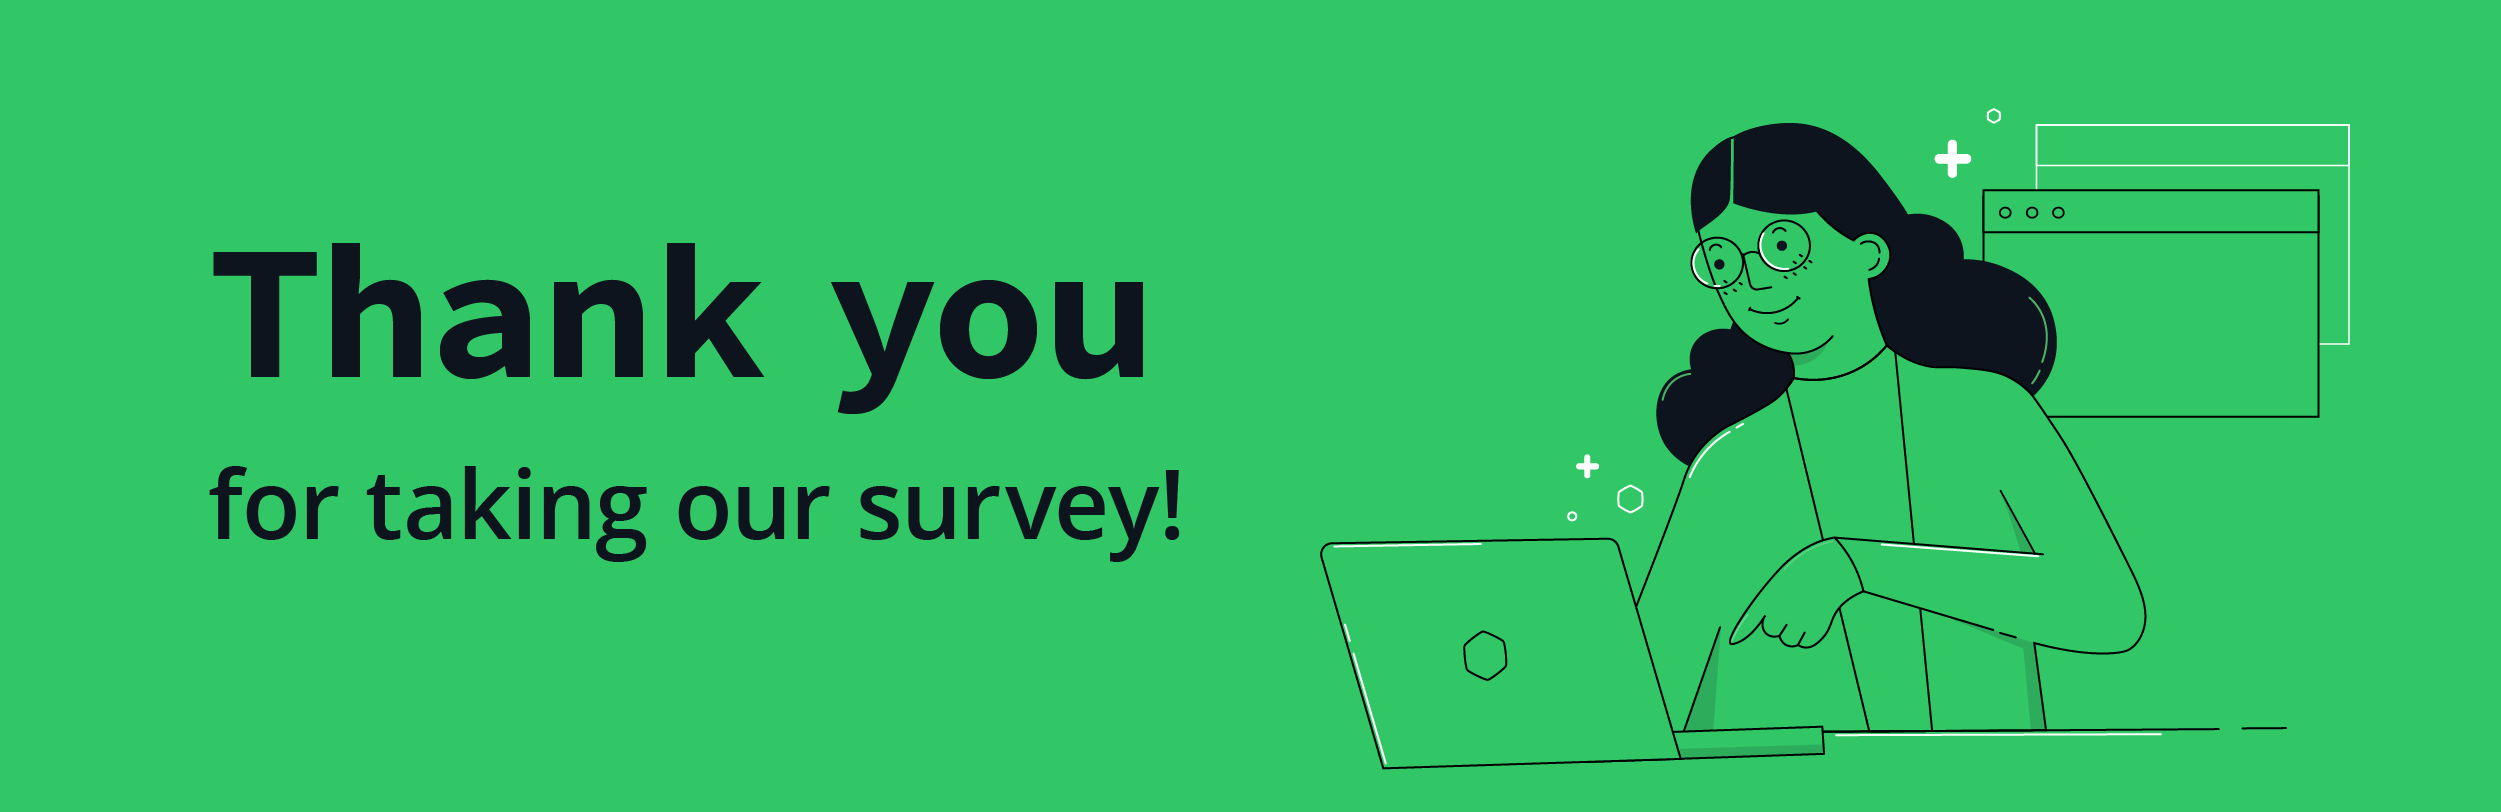 Thank you for taking our survey!